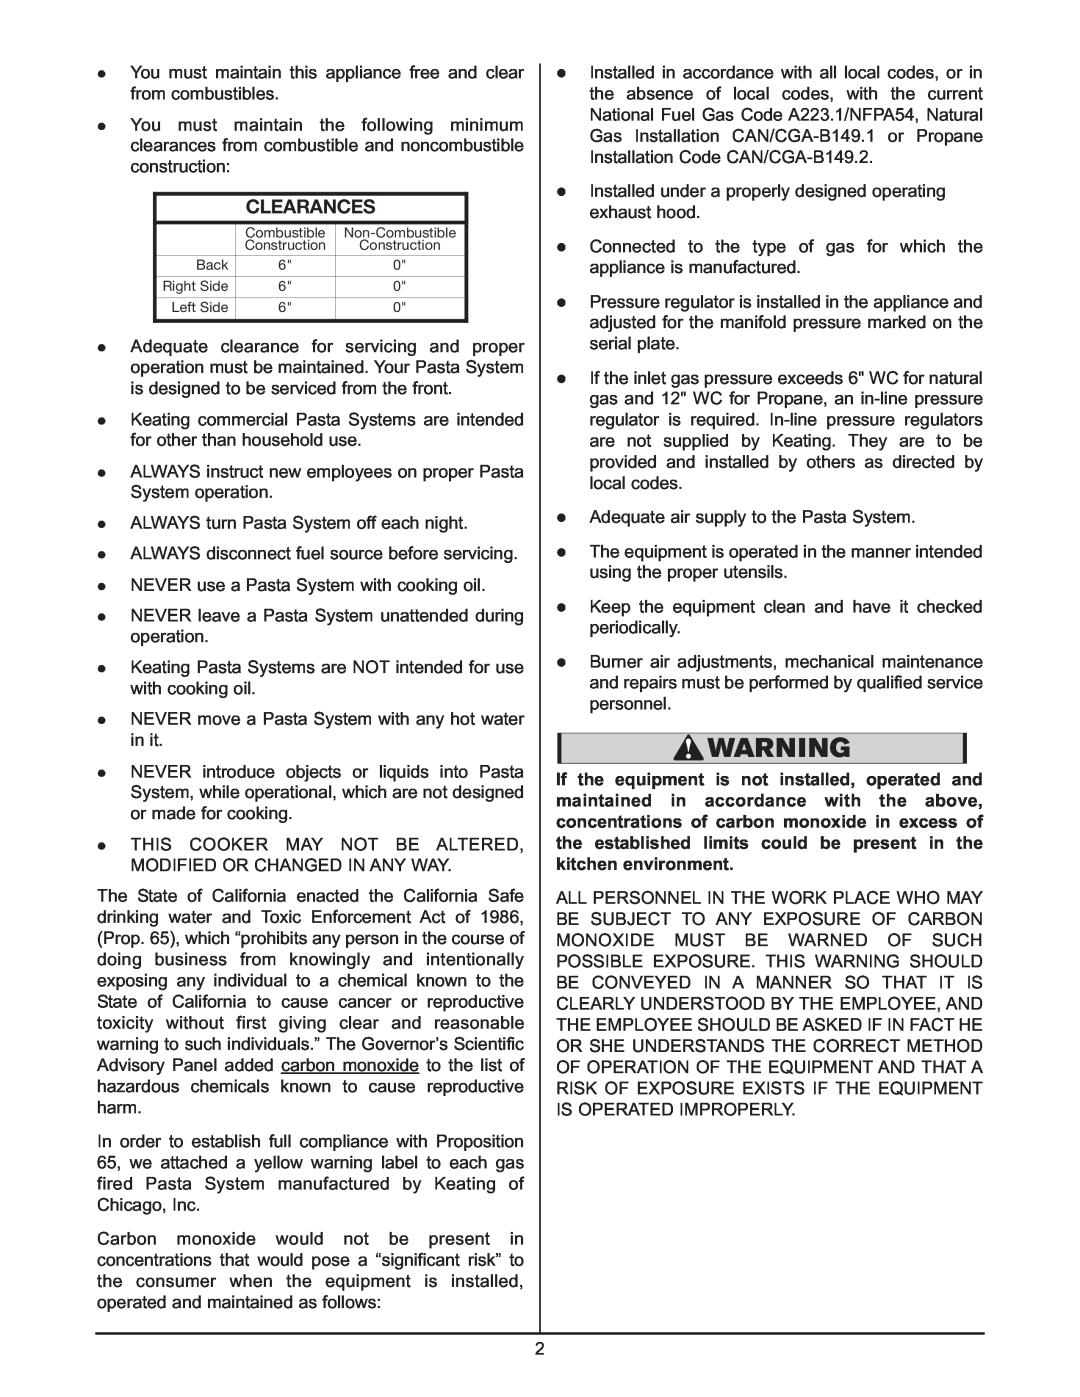 Keating Of Chicago 0107 service manual Clearances 